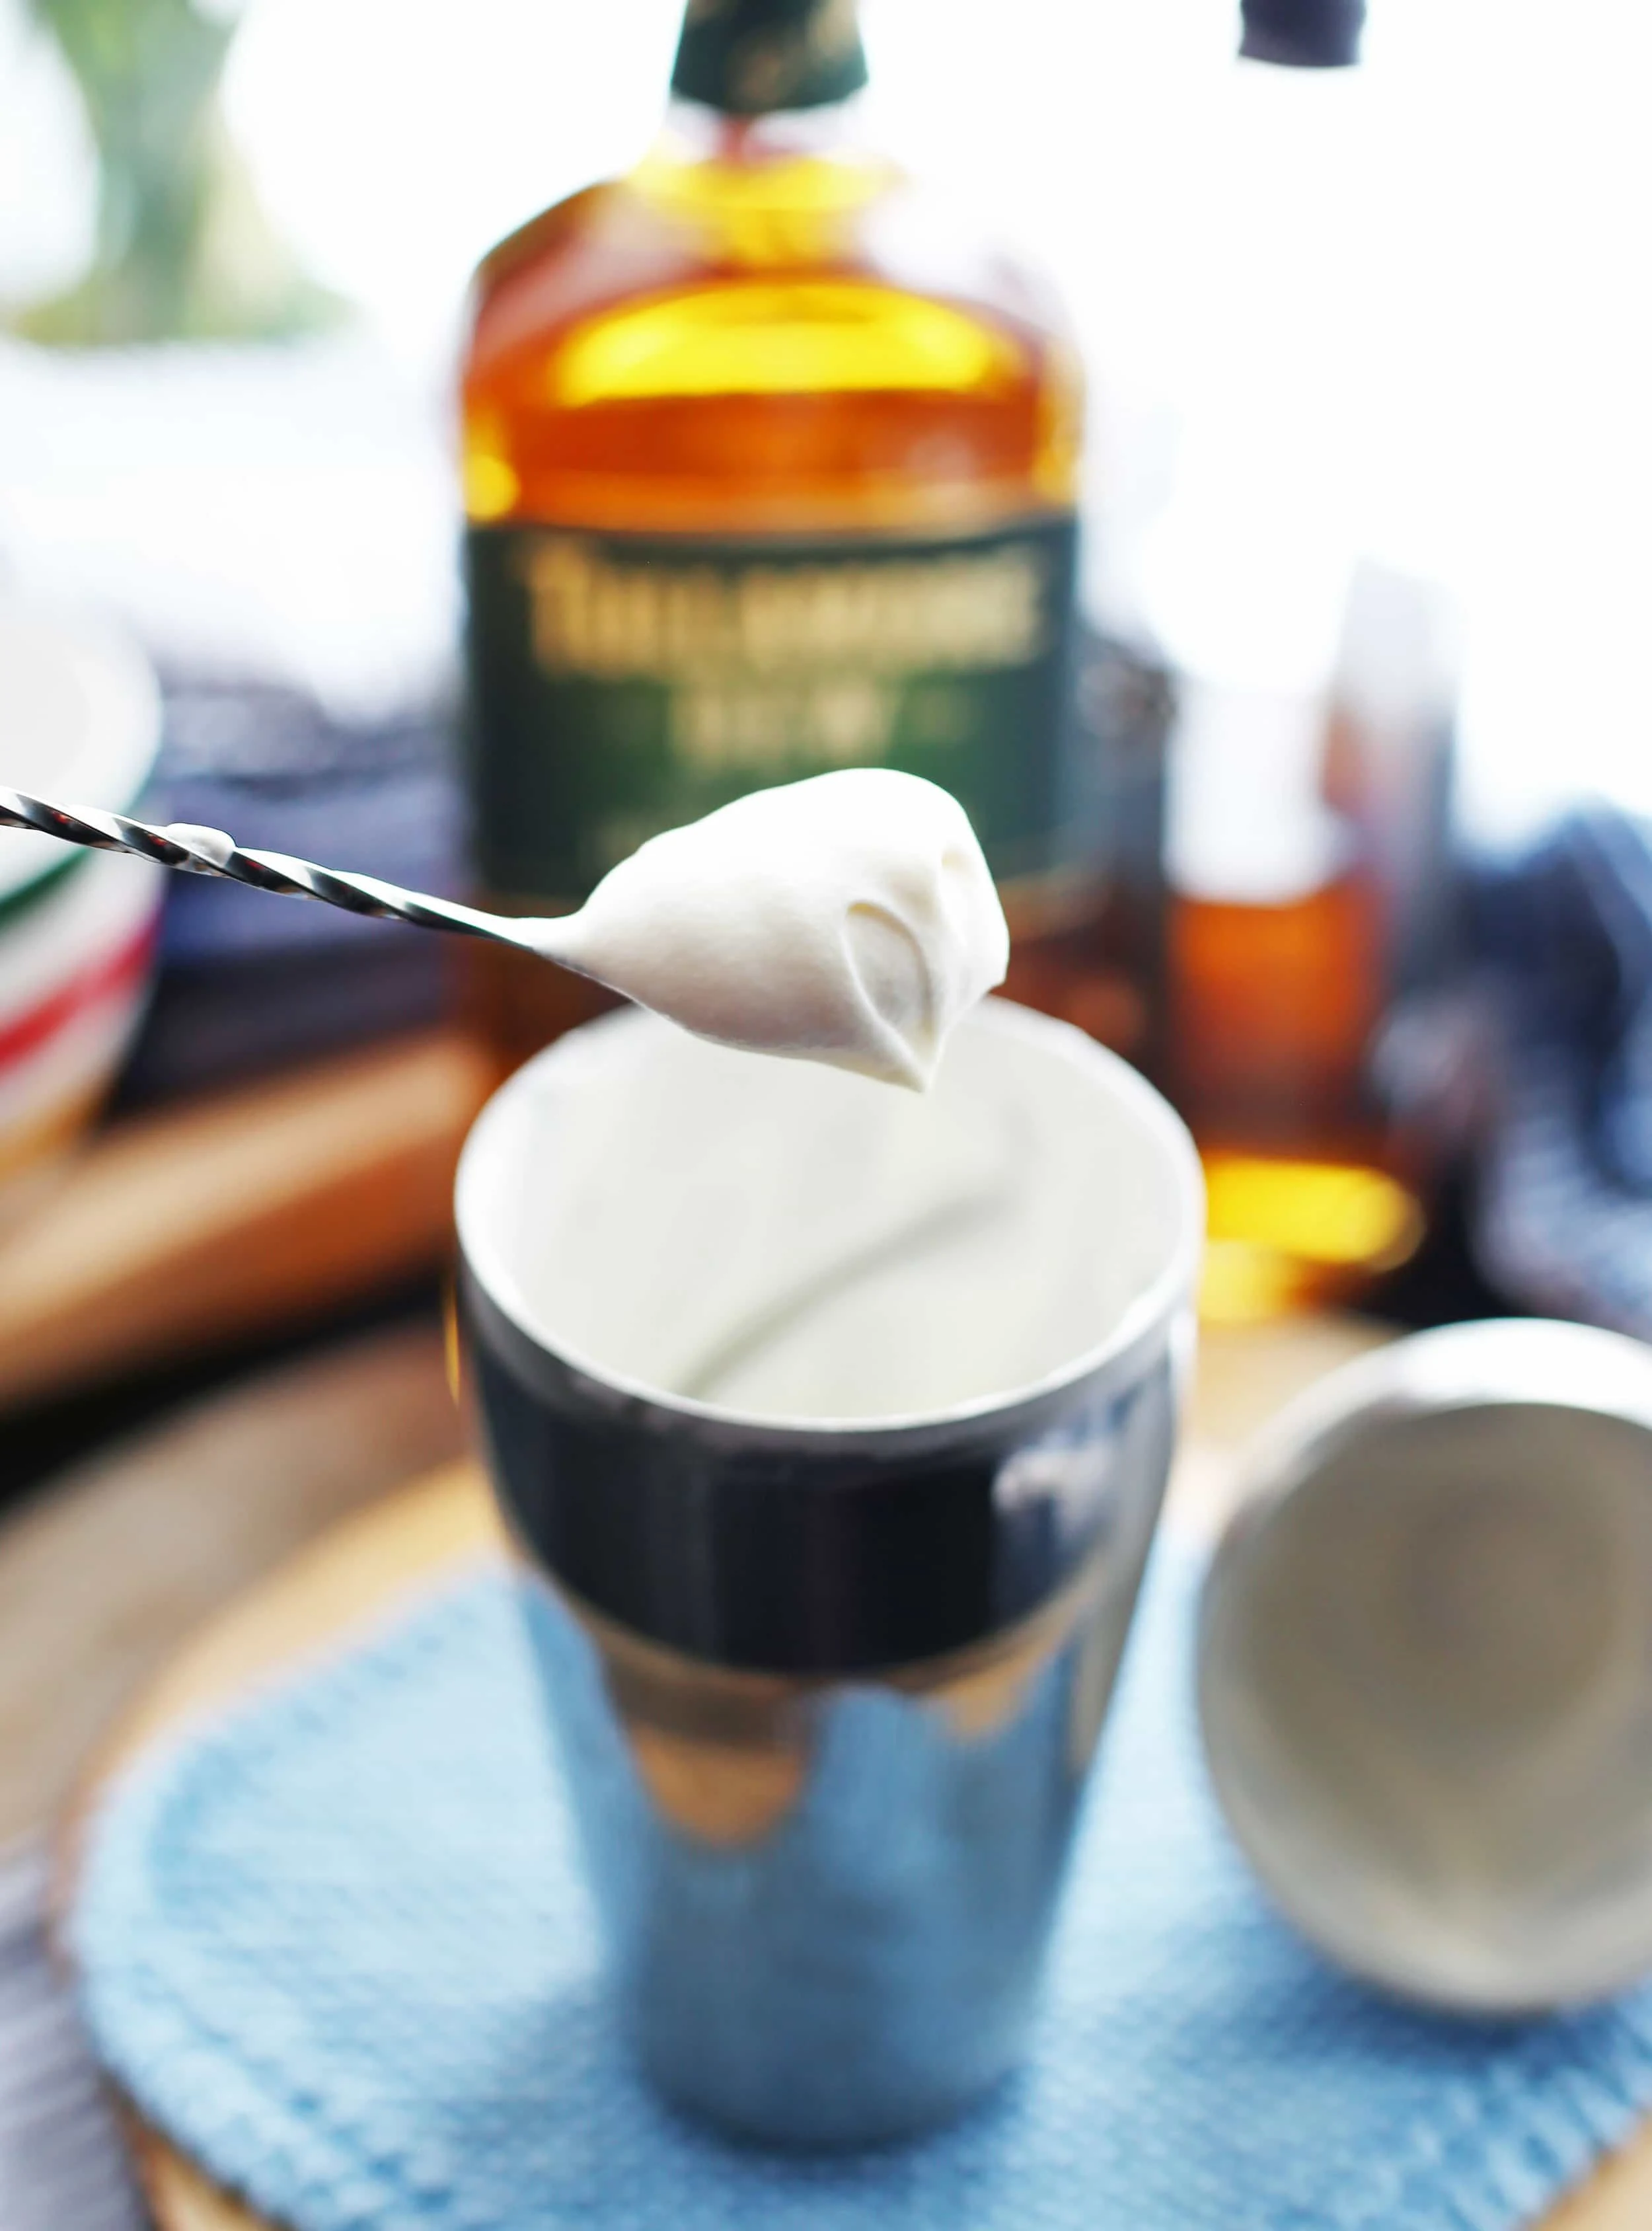 A long cocktail spoon holding a dollop of lightly whipped cream over a stainless steel cocktail shaker.